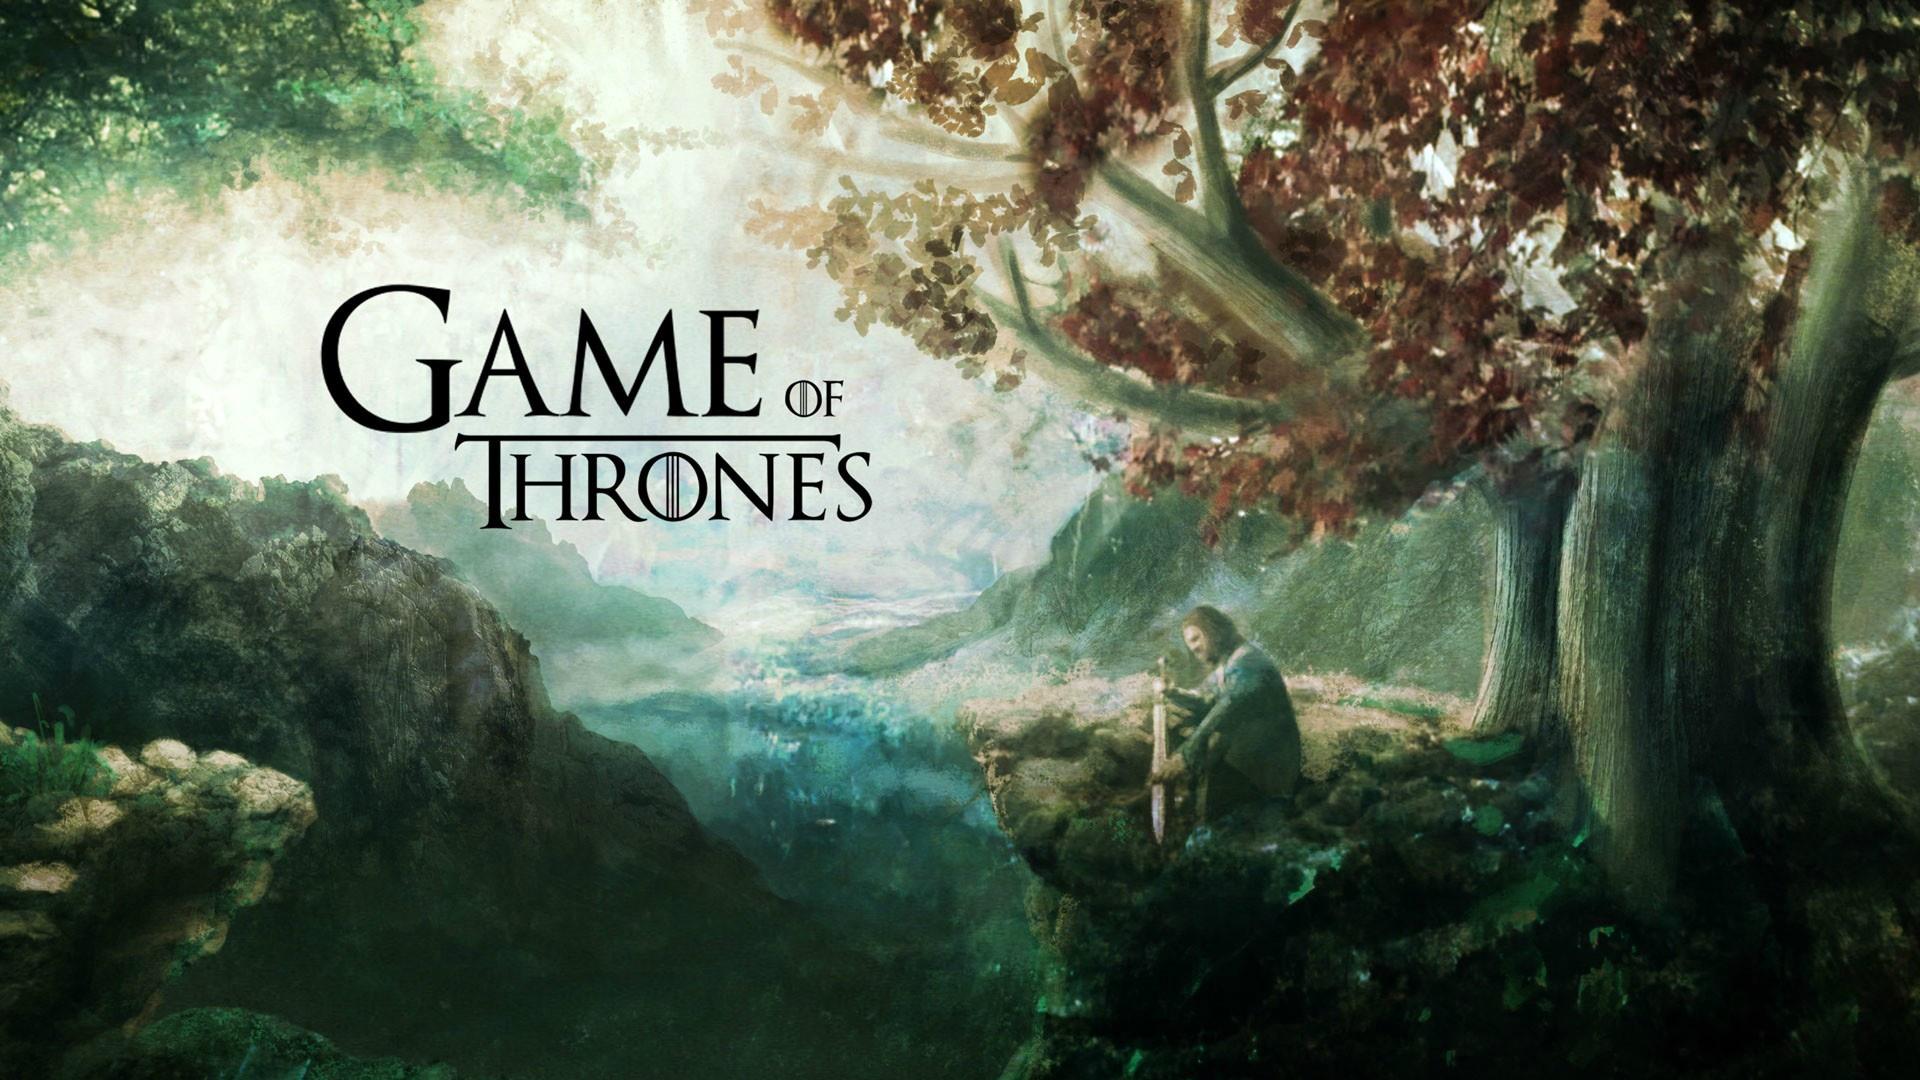 Game of Thrones TV Series Wallpaper in jpg format for free download